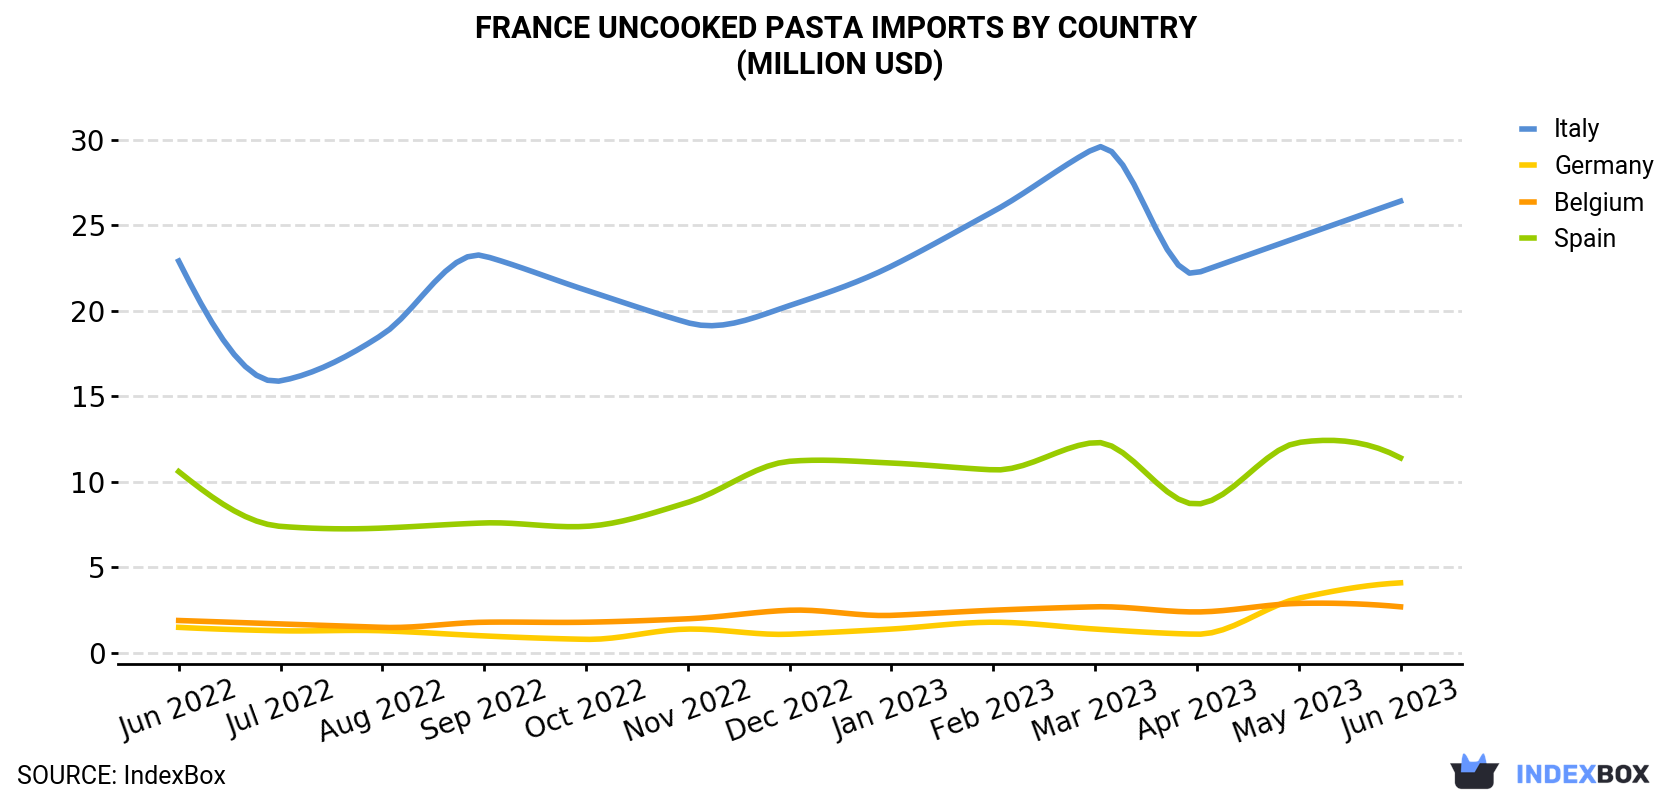 France Uncooked Pasta Imports By Country (Million USD)